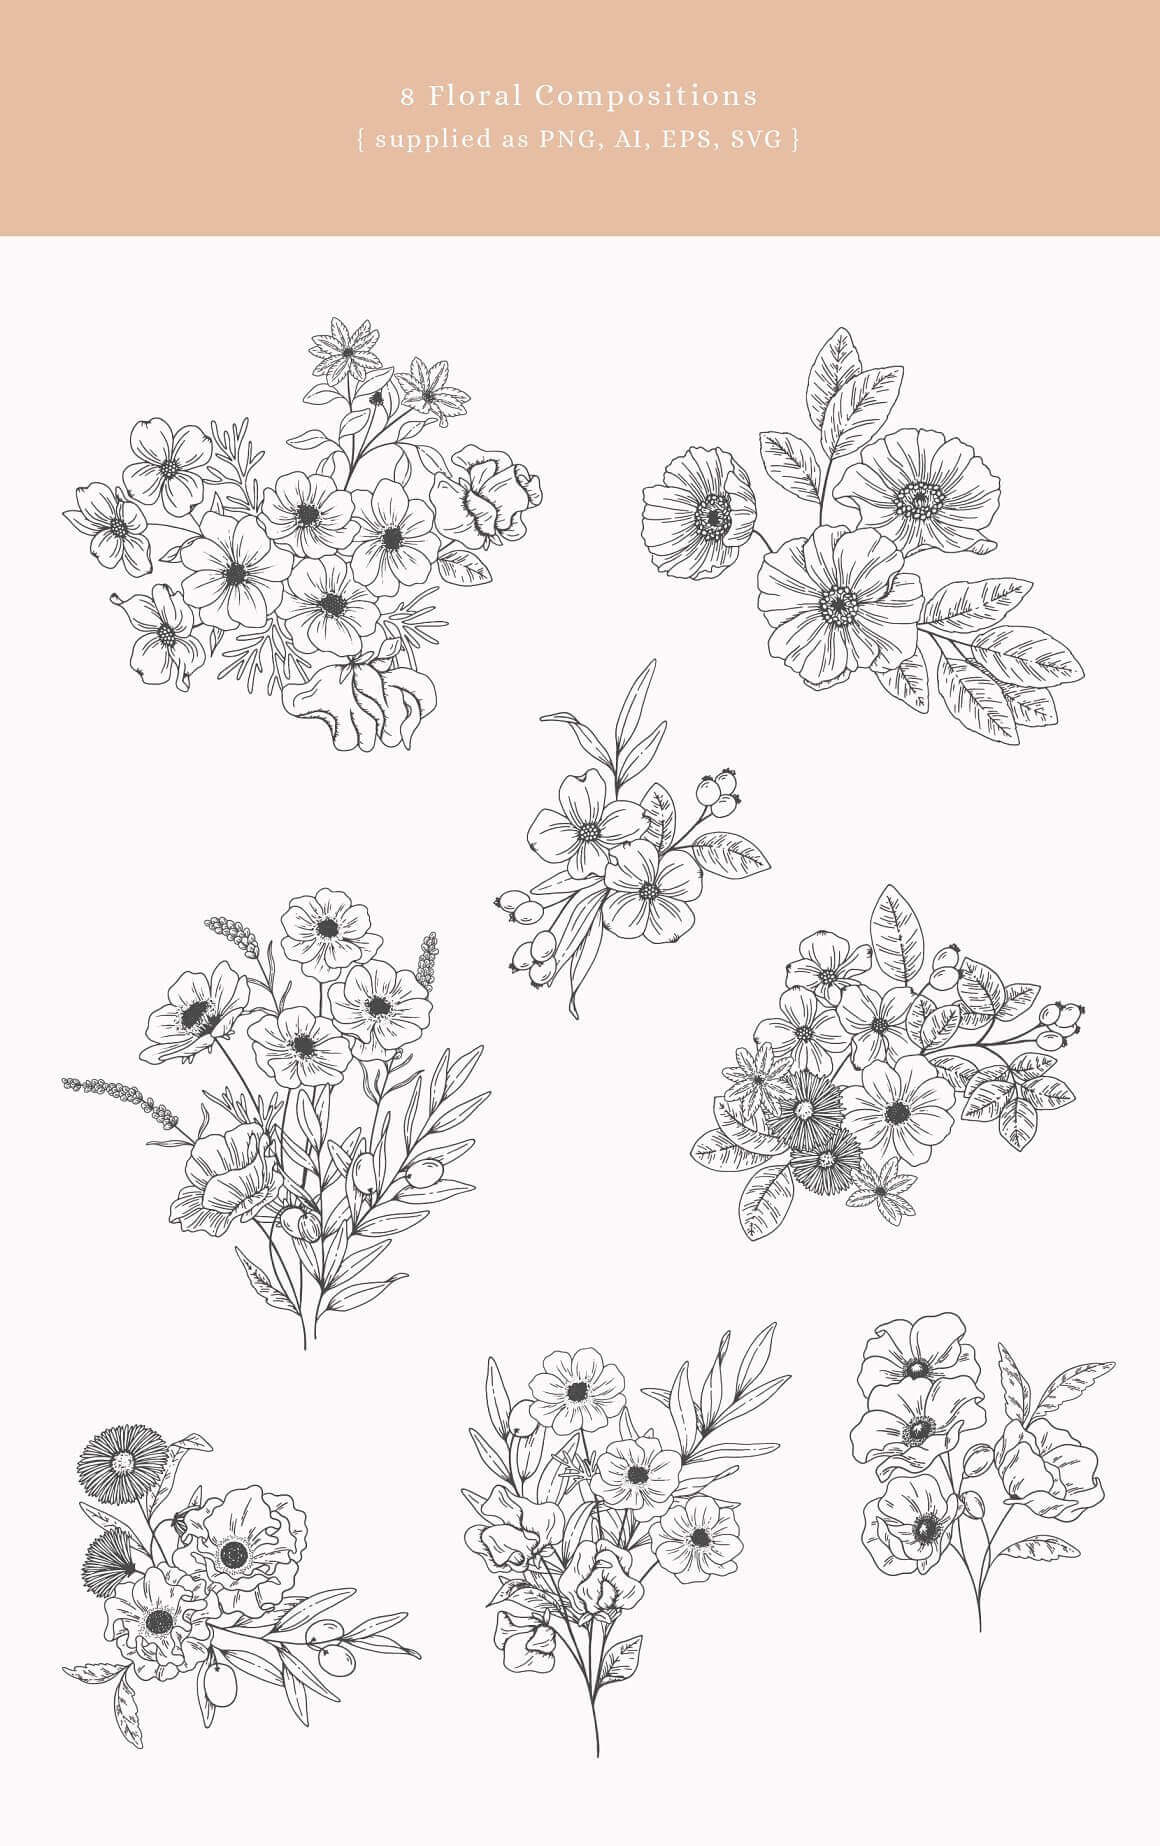 8 Floral Compositions Supplied as PNG, AI, EPS, SVG.